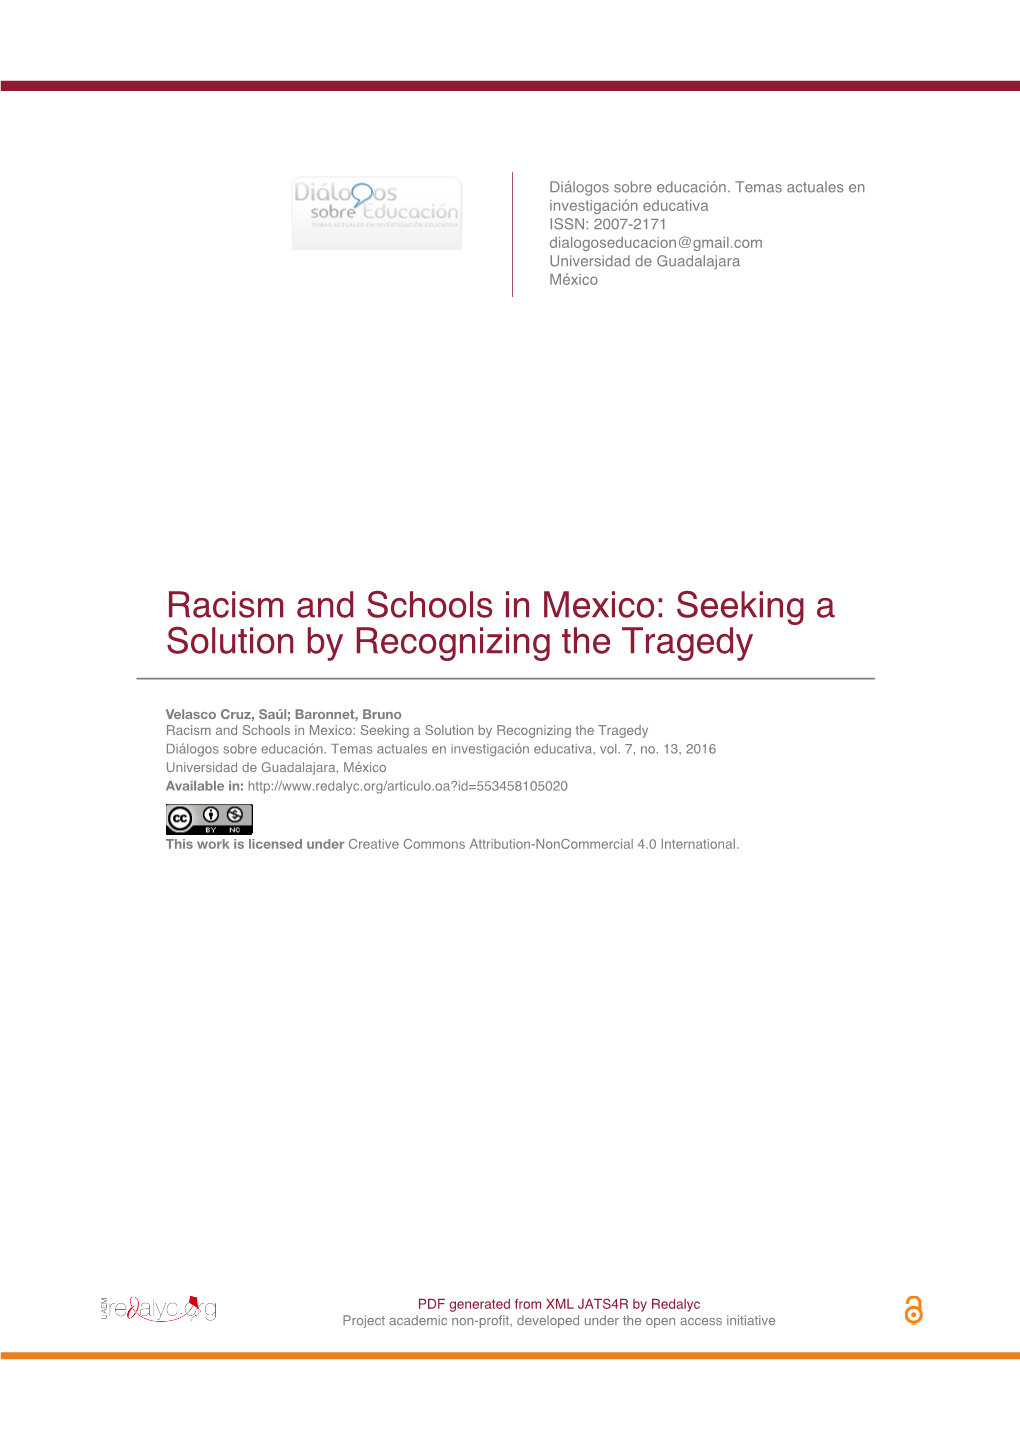 Racism and Schools in Mexico: Seeking a Solution by Recognizing the Tragedy